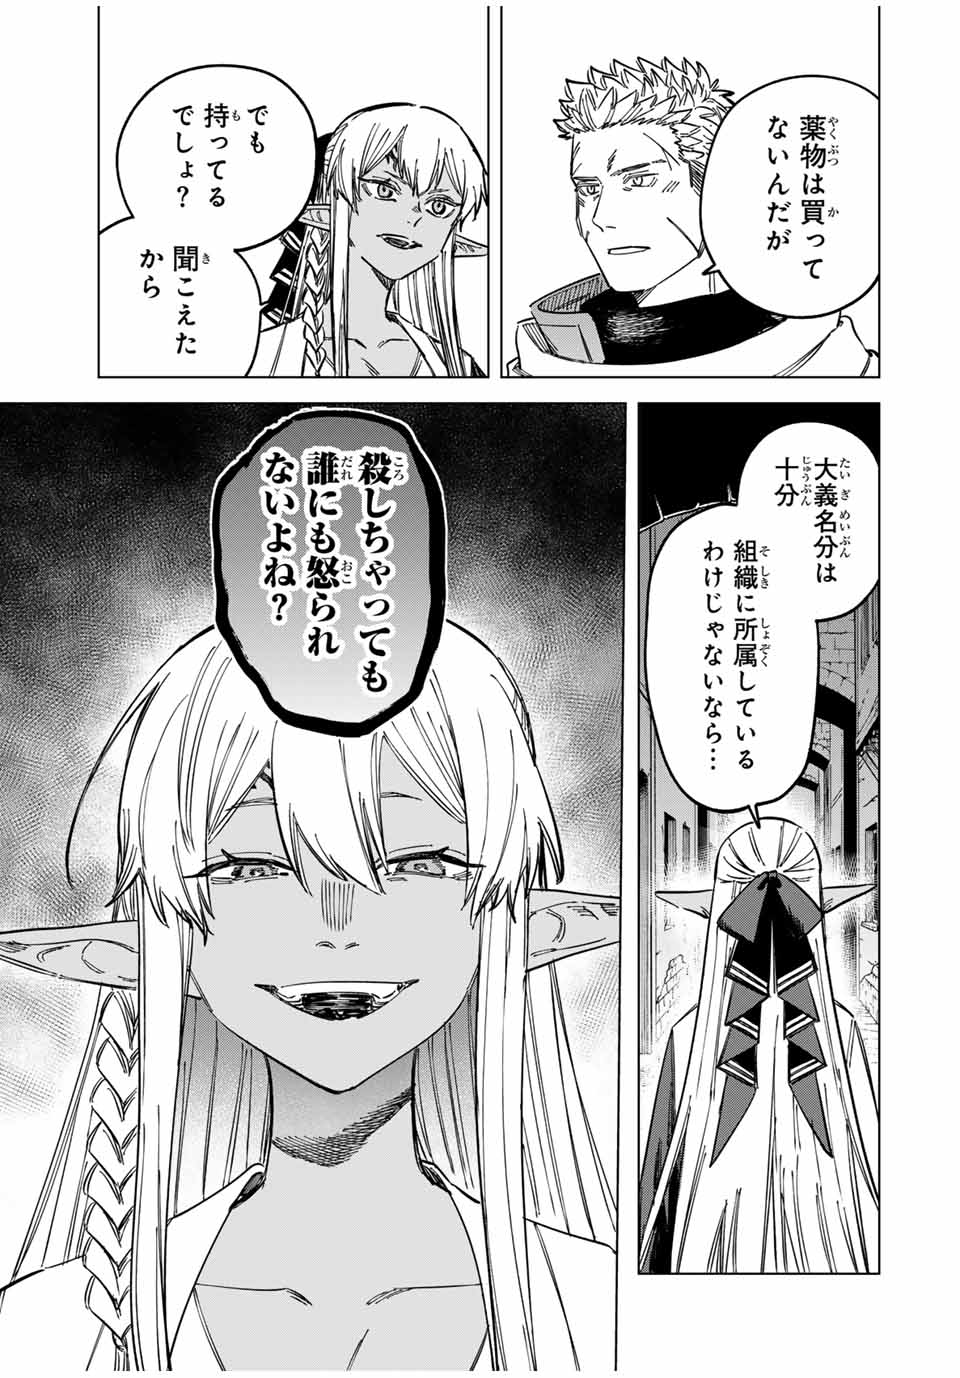 Witch and Mercenary 魔女と傭兵 第11話 - Page 17